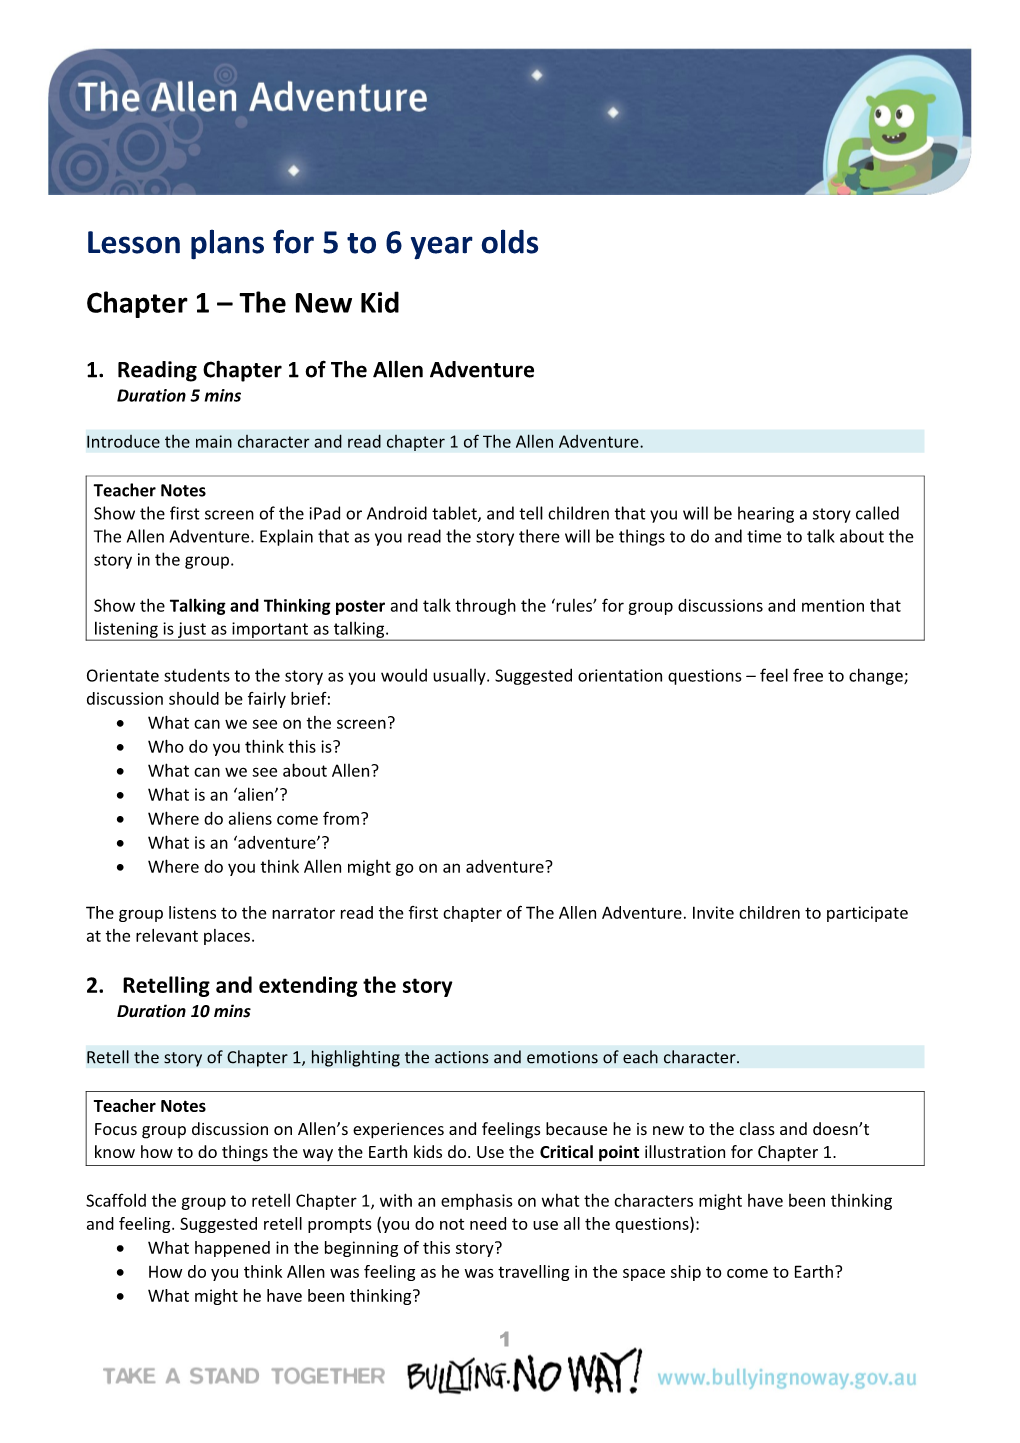 Lesson Plans for 5 to 6 Year Olds